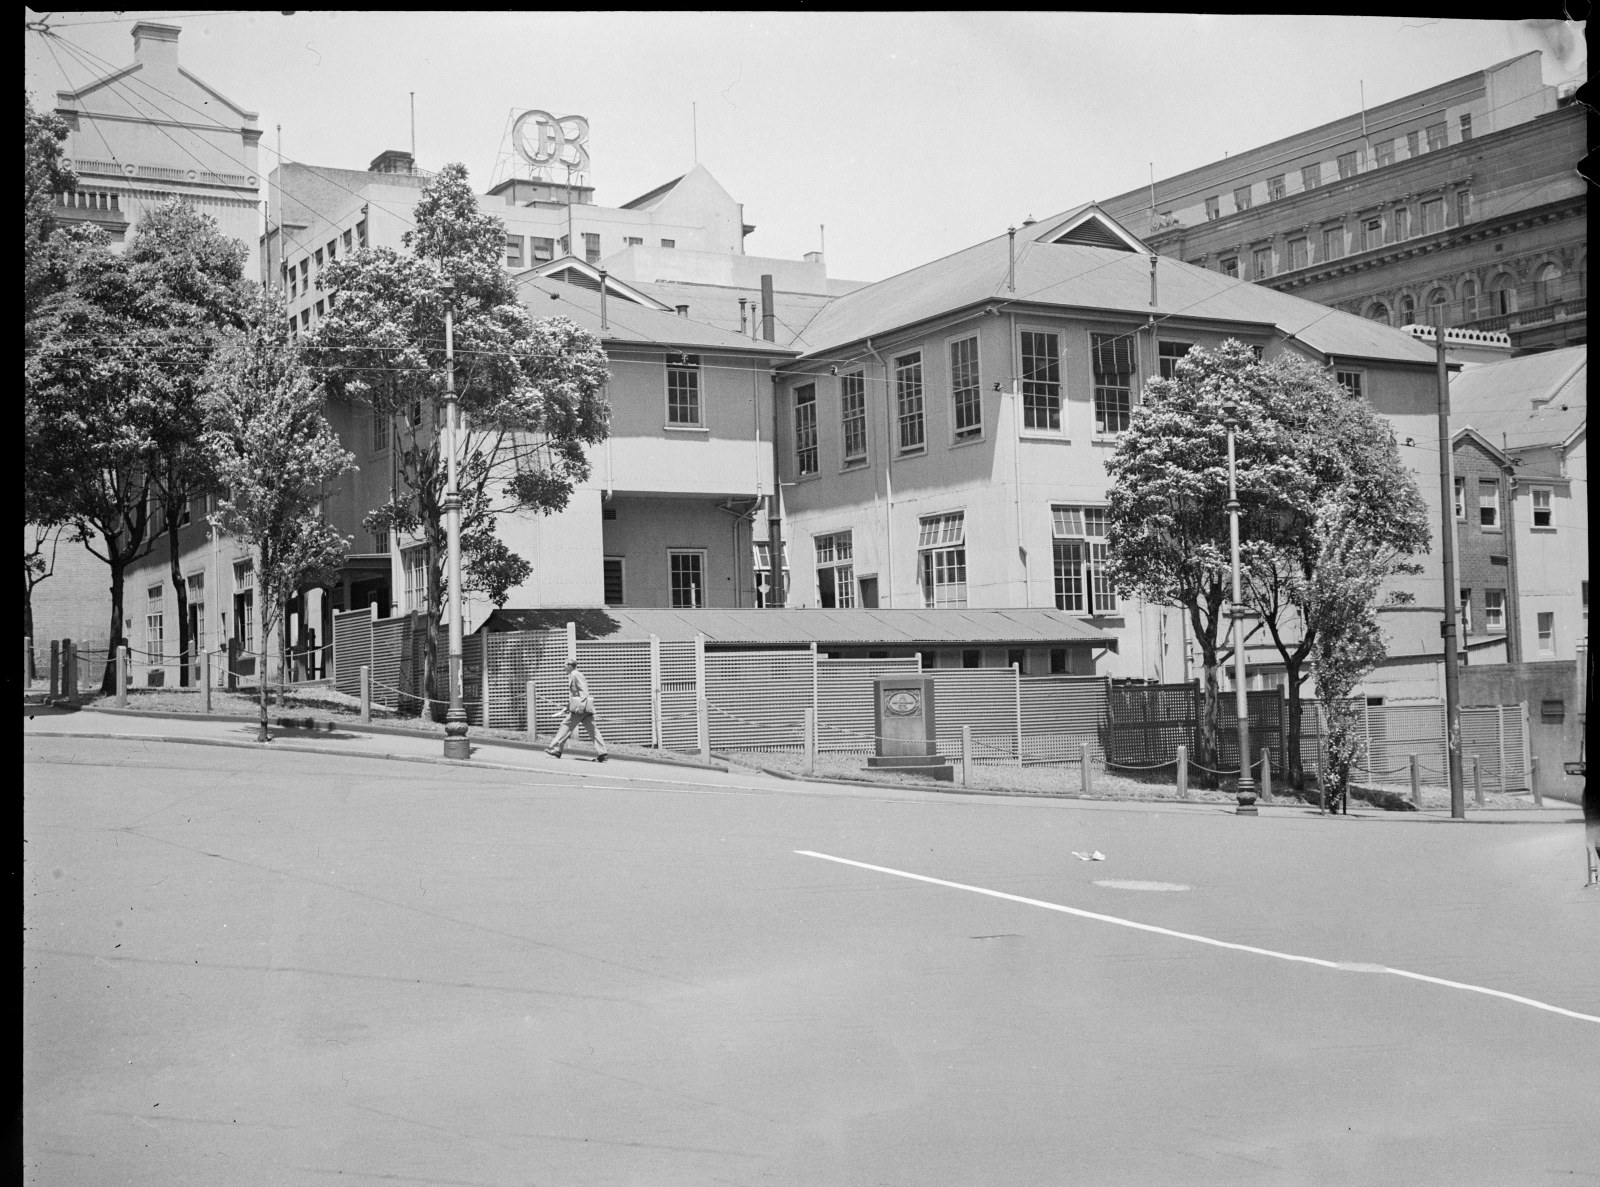 The Department of Public Works building on the site of the first Government House, photographer Robert Rice, 16 November 1949. Mitchell Library, State Library of NSW: ON 388/Box 002/Item 038